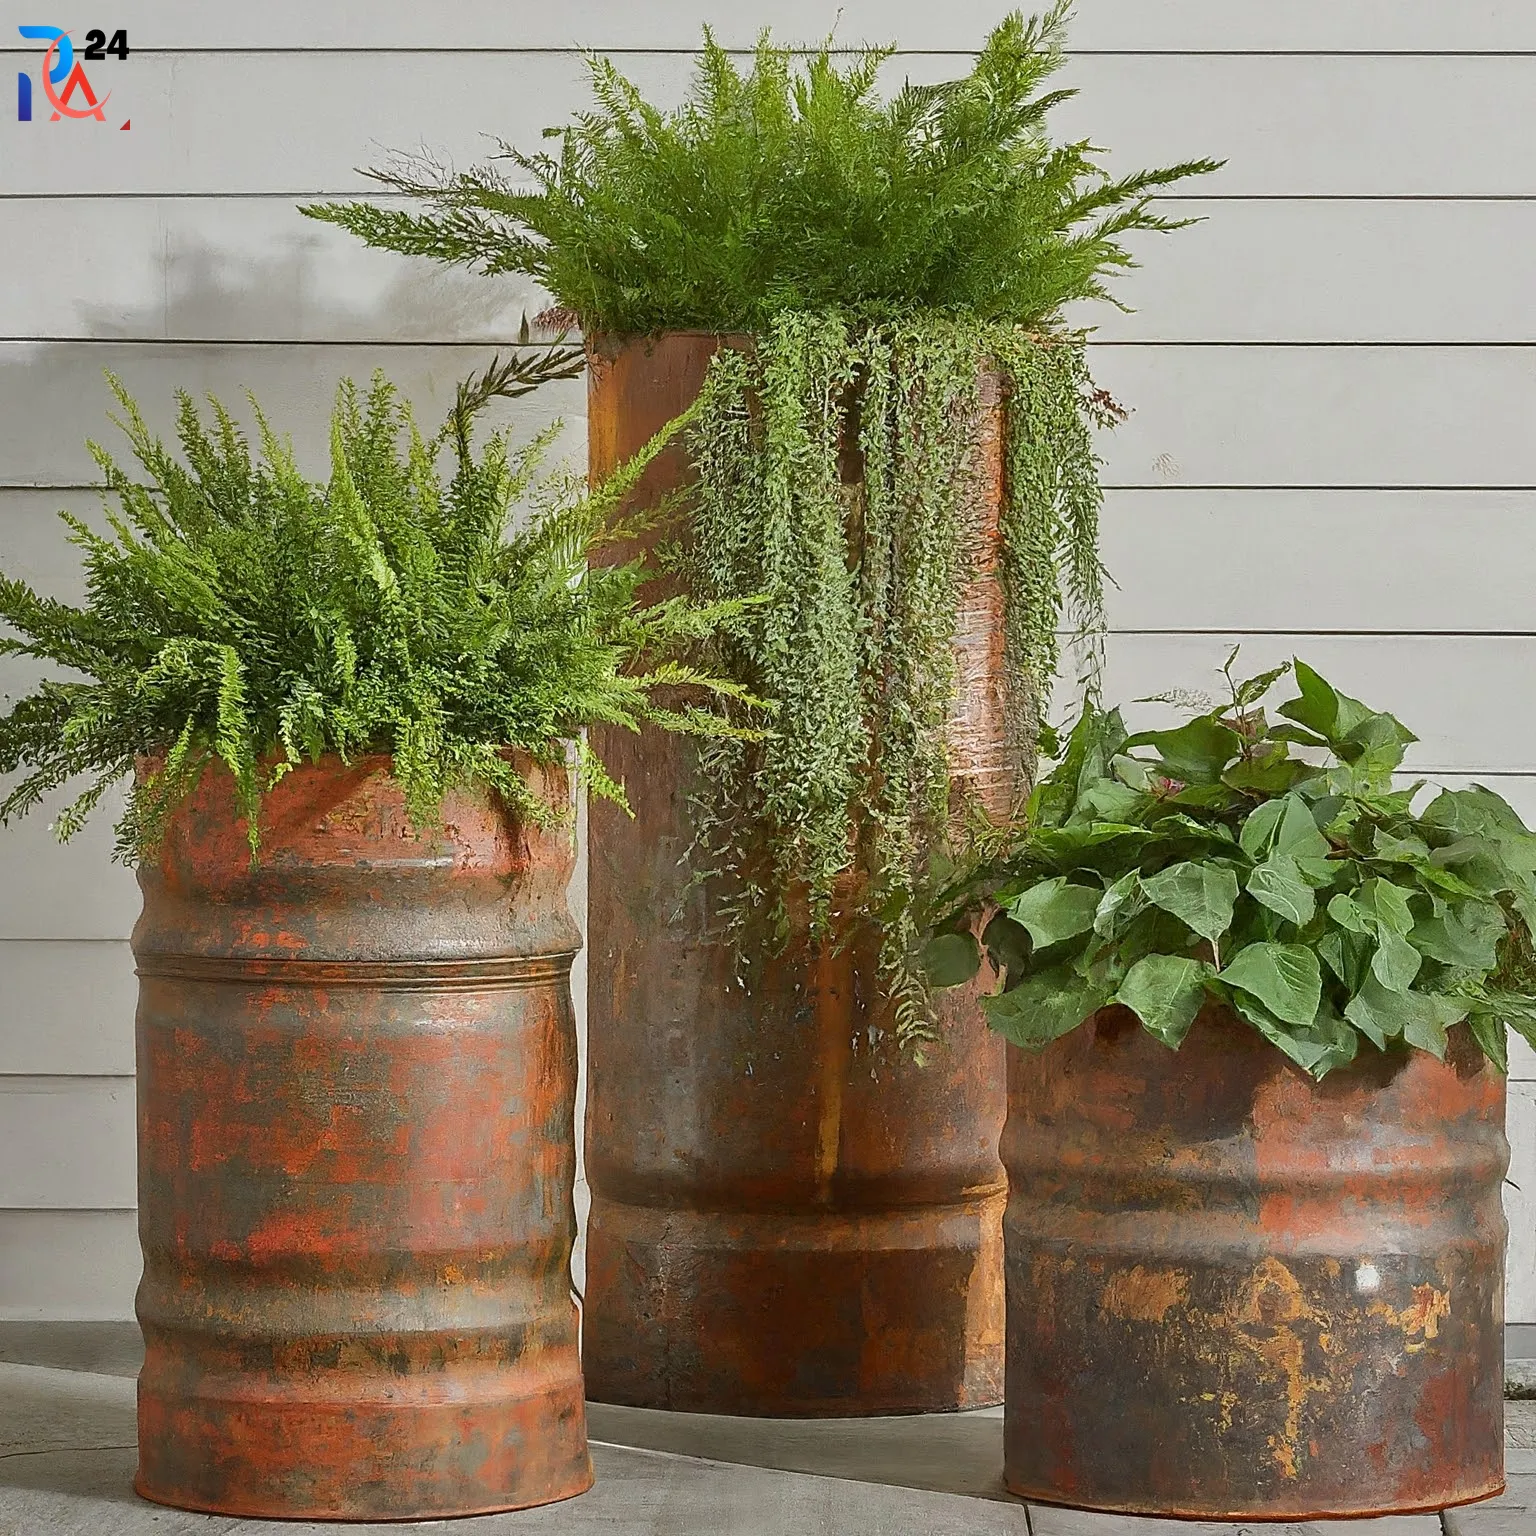 Repurposed Containers tall planter ideas (4)